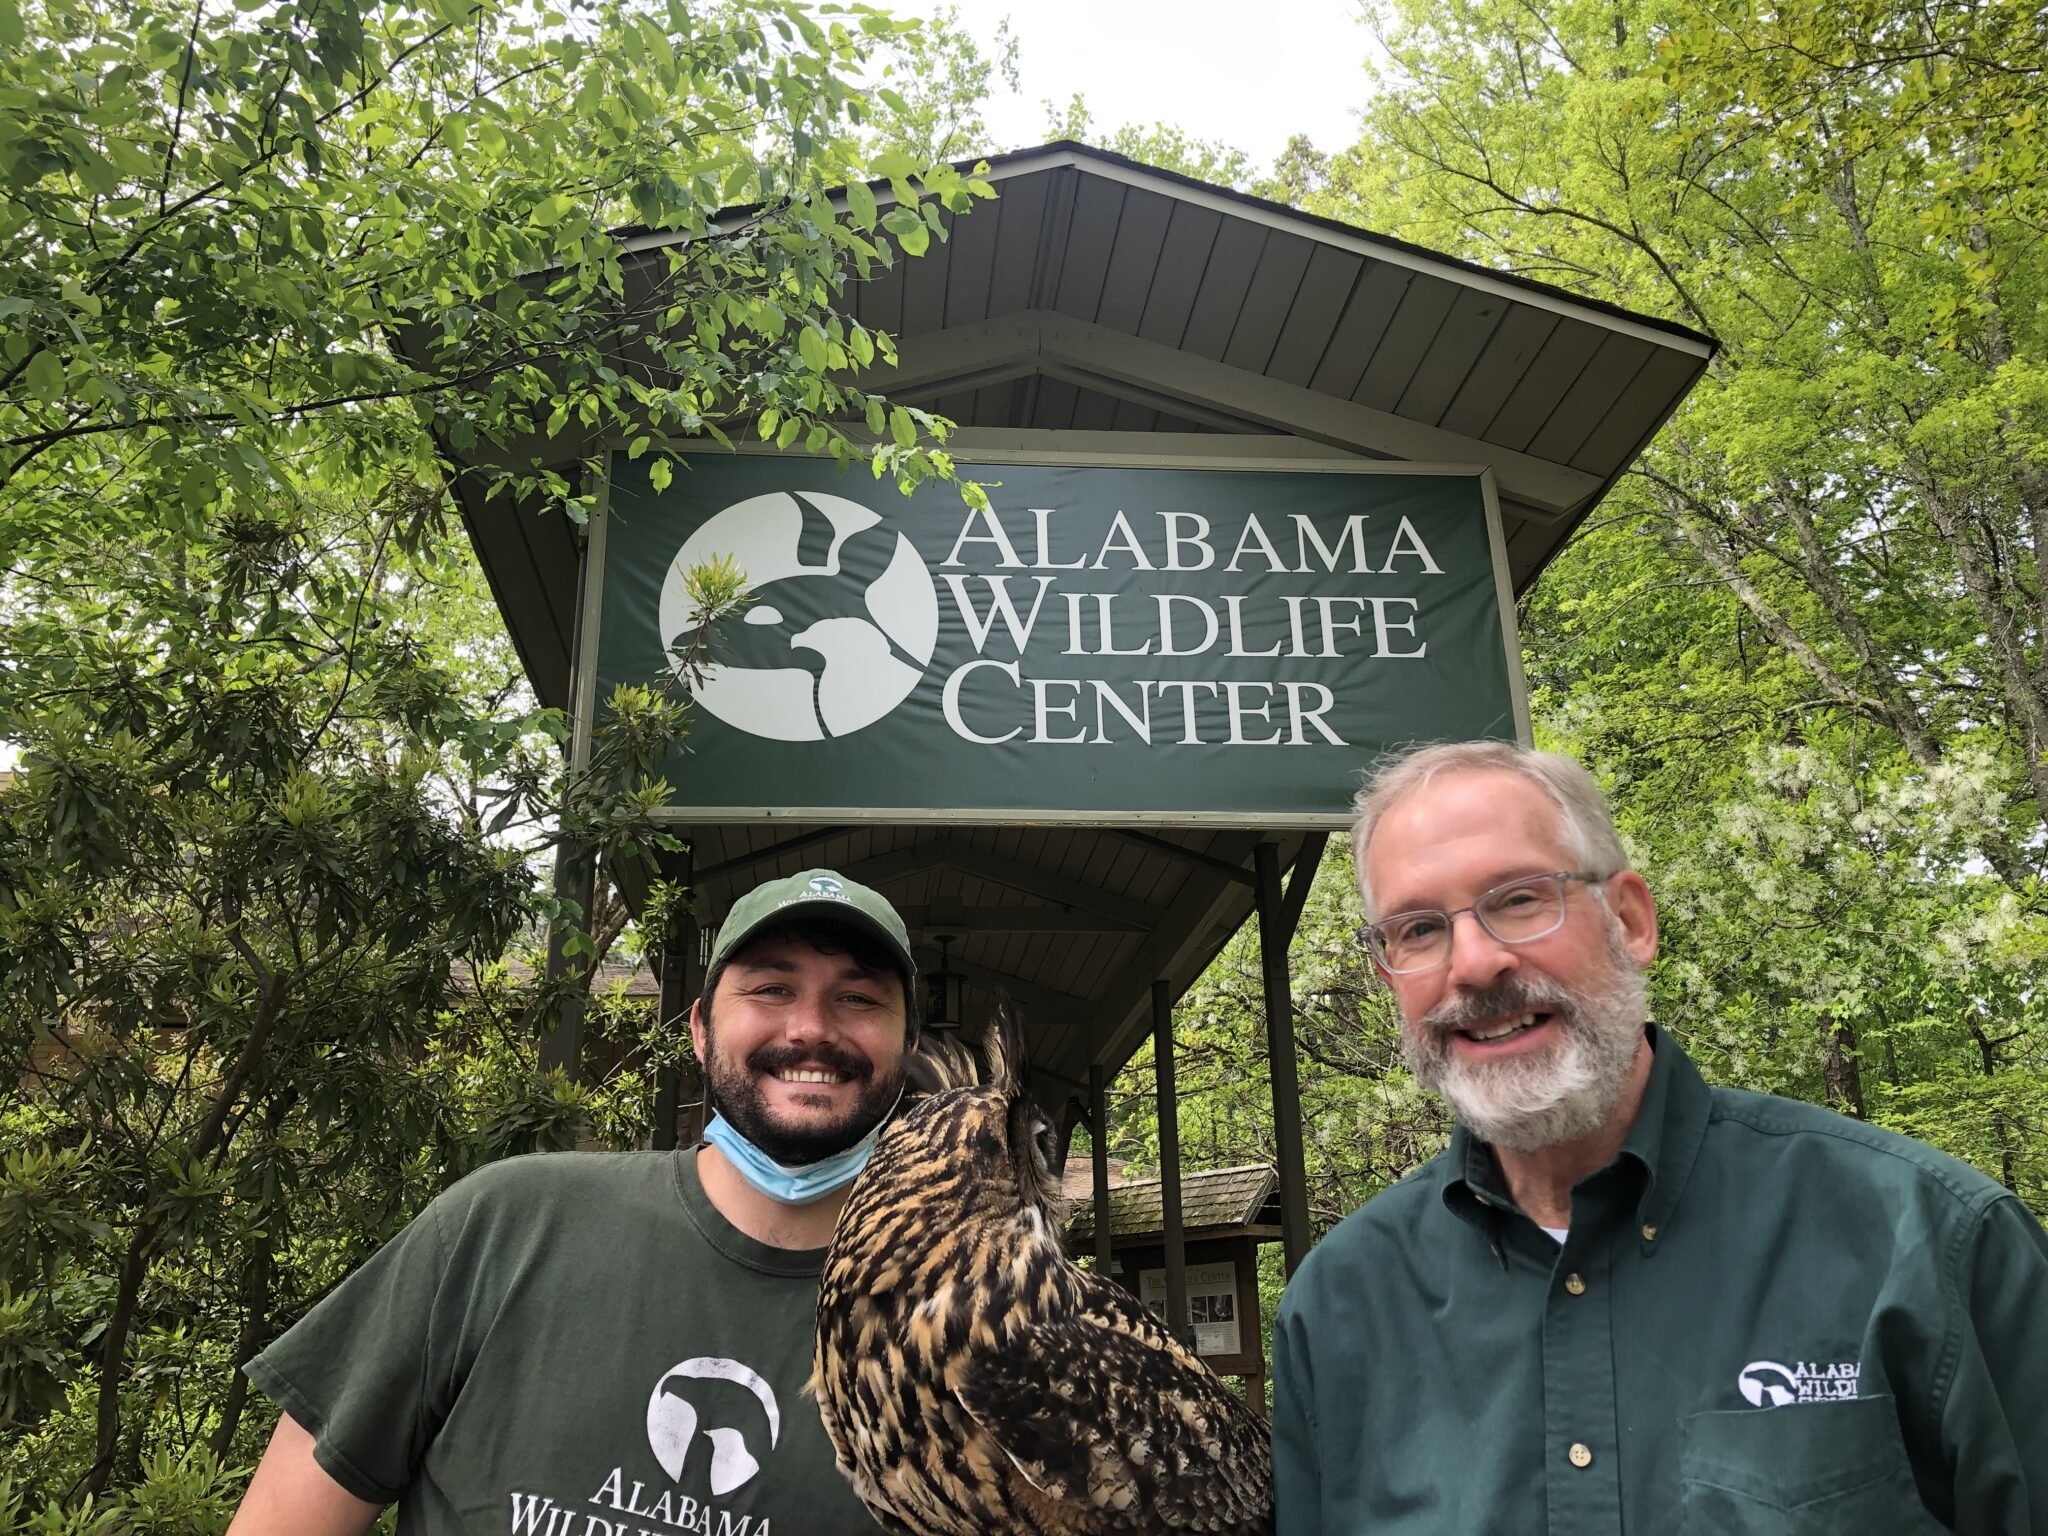 Remembering the life of Douglas Adair from Alabama Wildlife Center